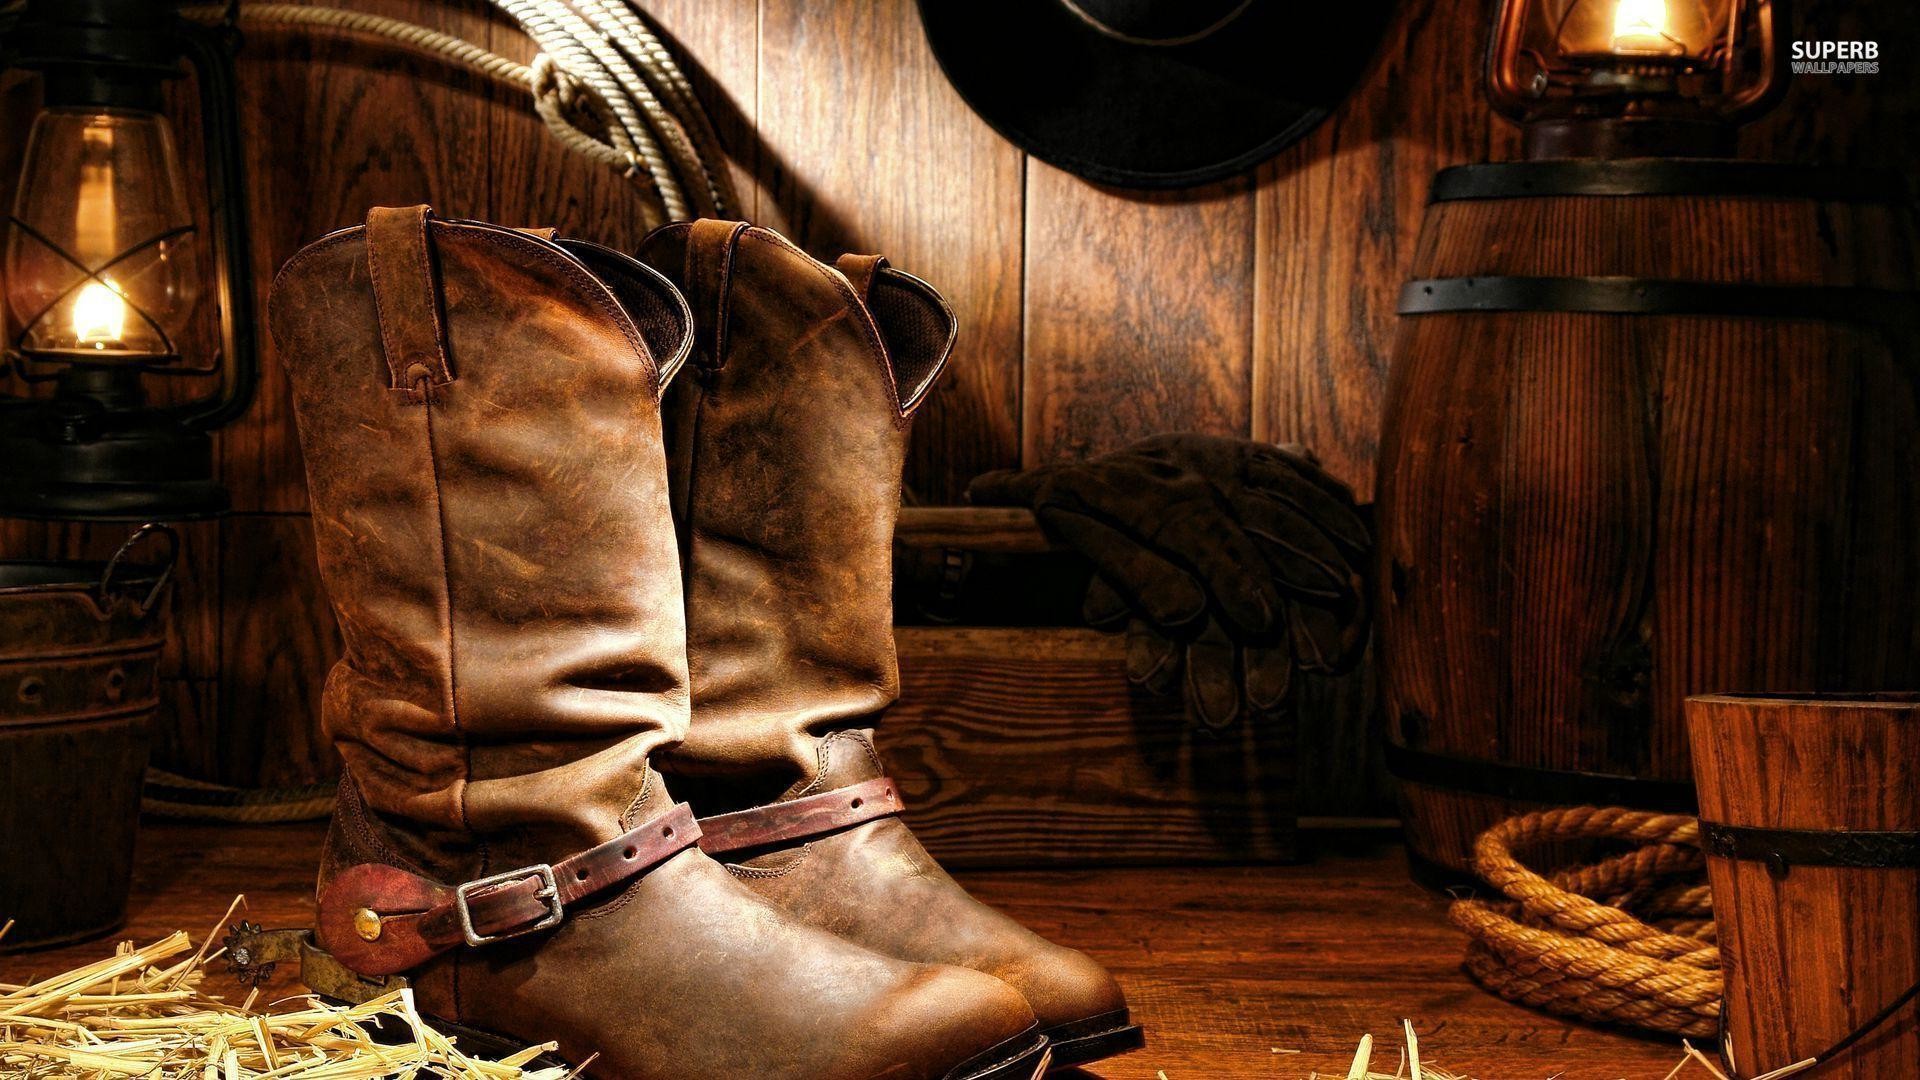 1920x1080 Cowboy boots wallpaper - Photography wallpapers - #